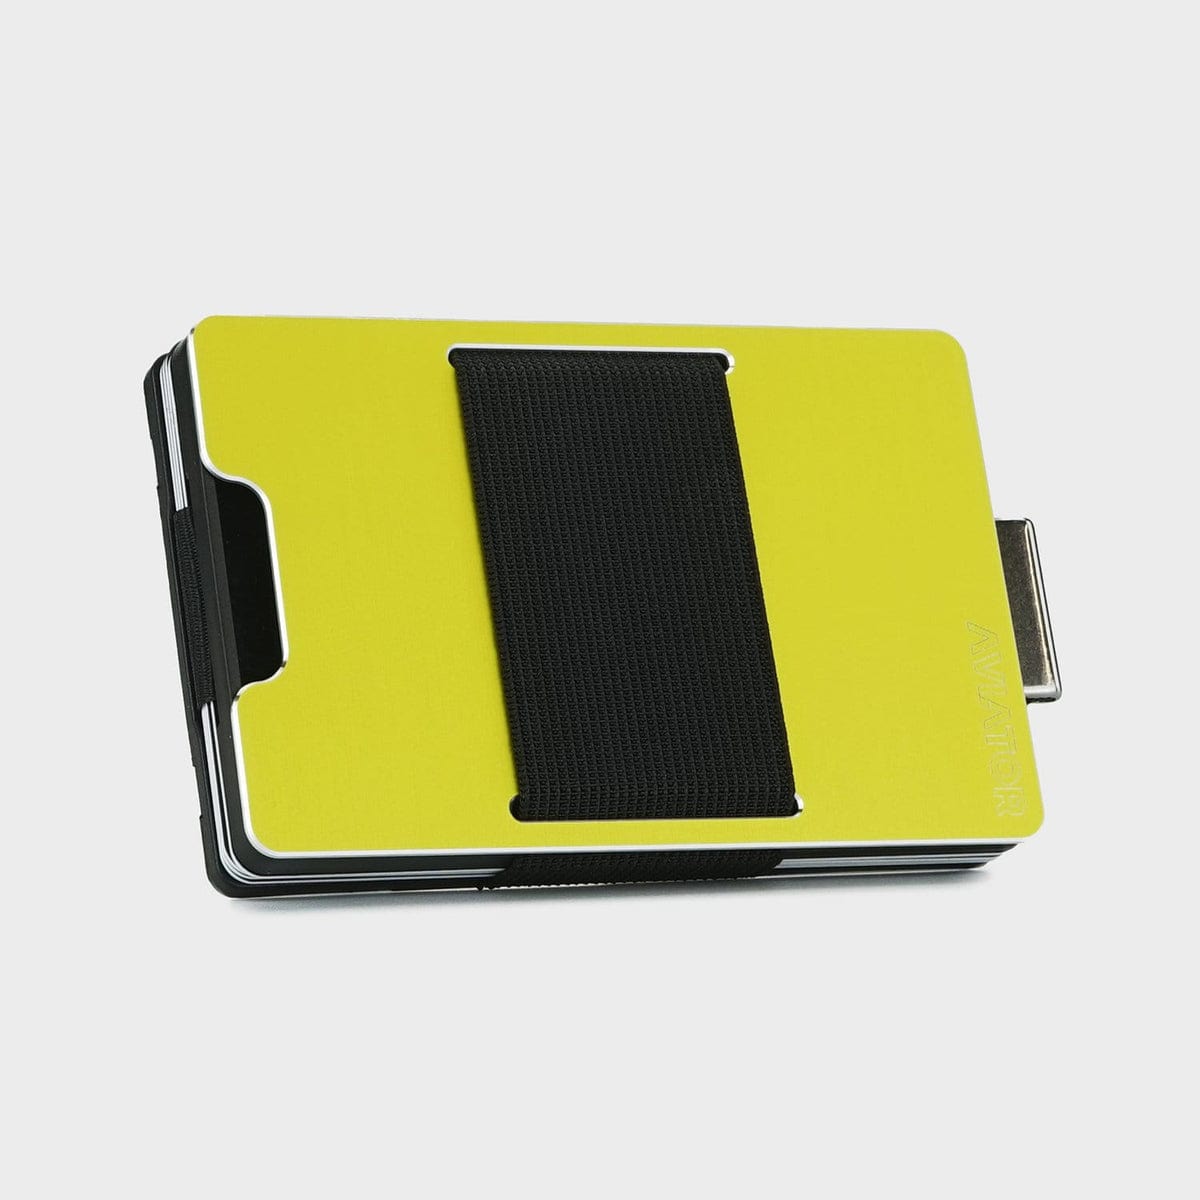 NOT FLAW[LESS] Electric Lime Aluminium Slim Wallet